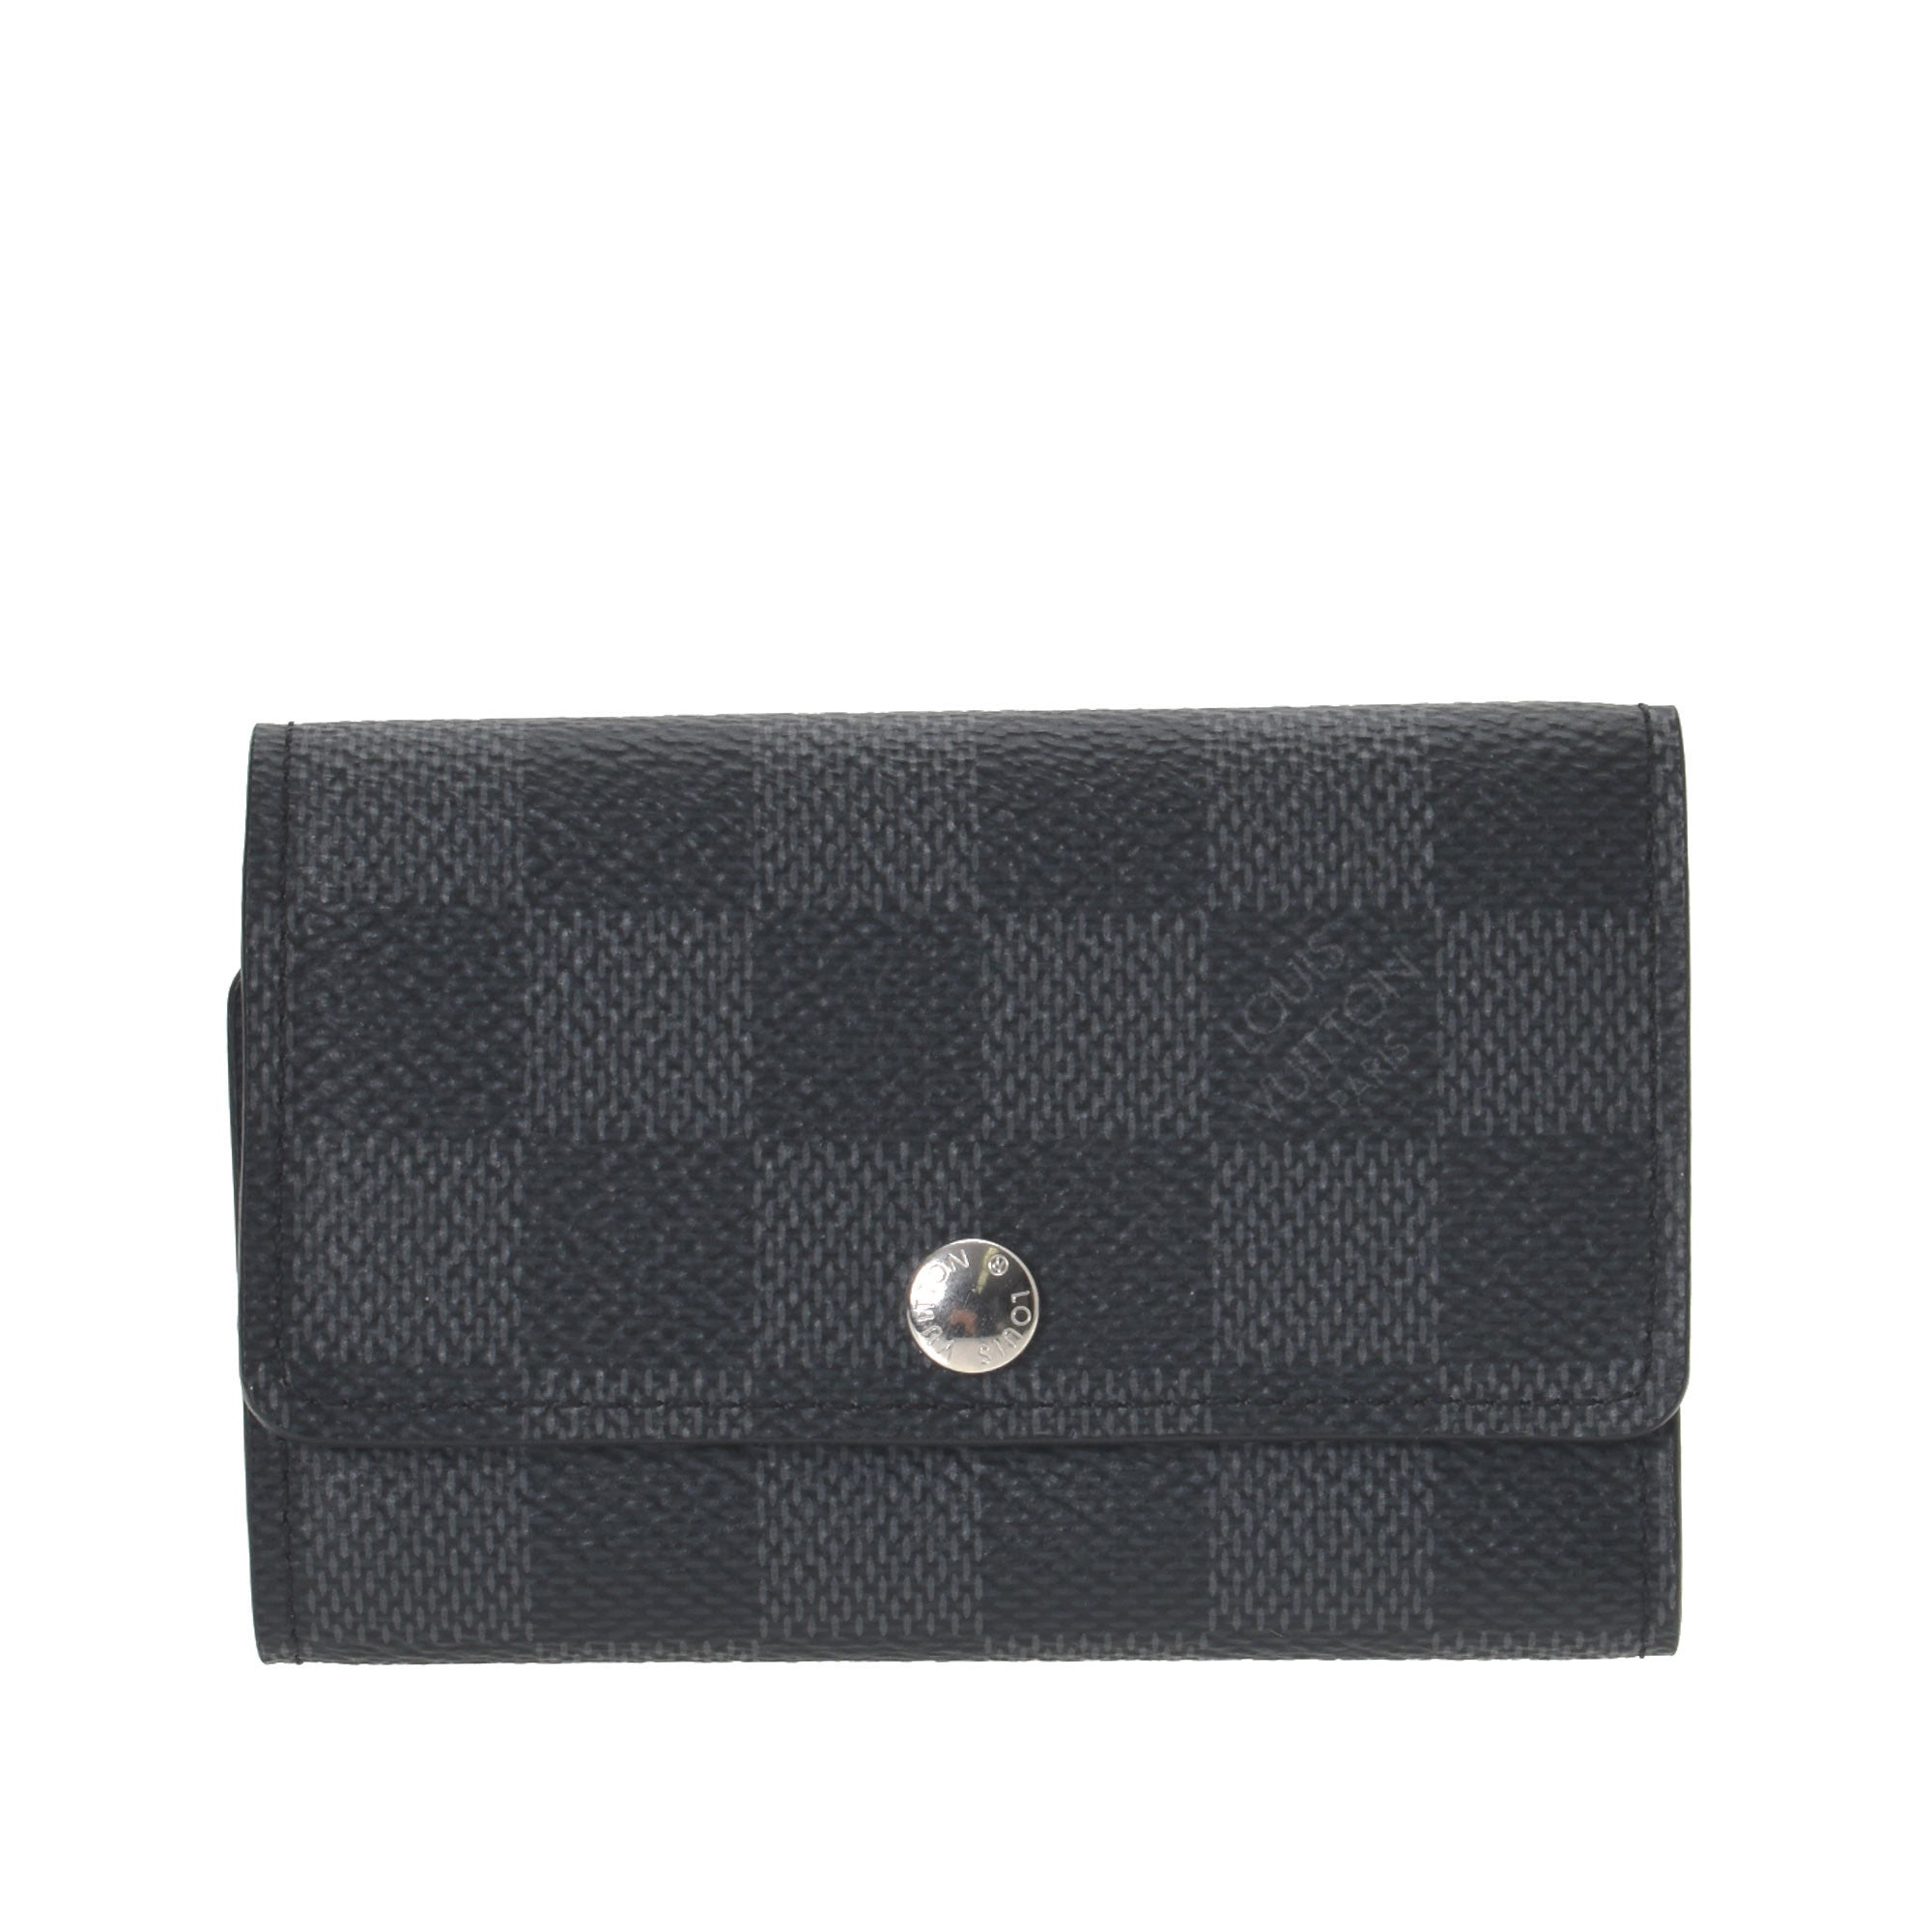 Louis Vuitton SPECIAL Limited STUDS Collection CARD Holder Damier